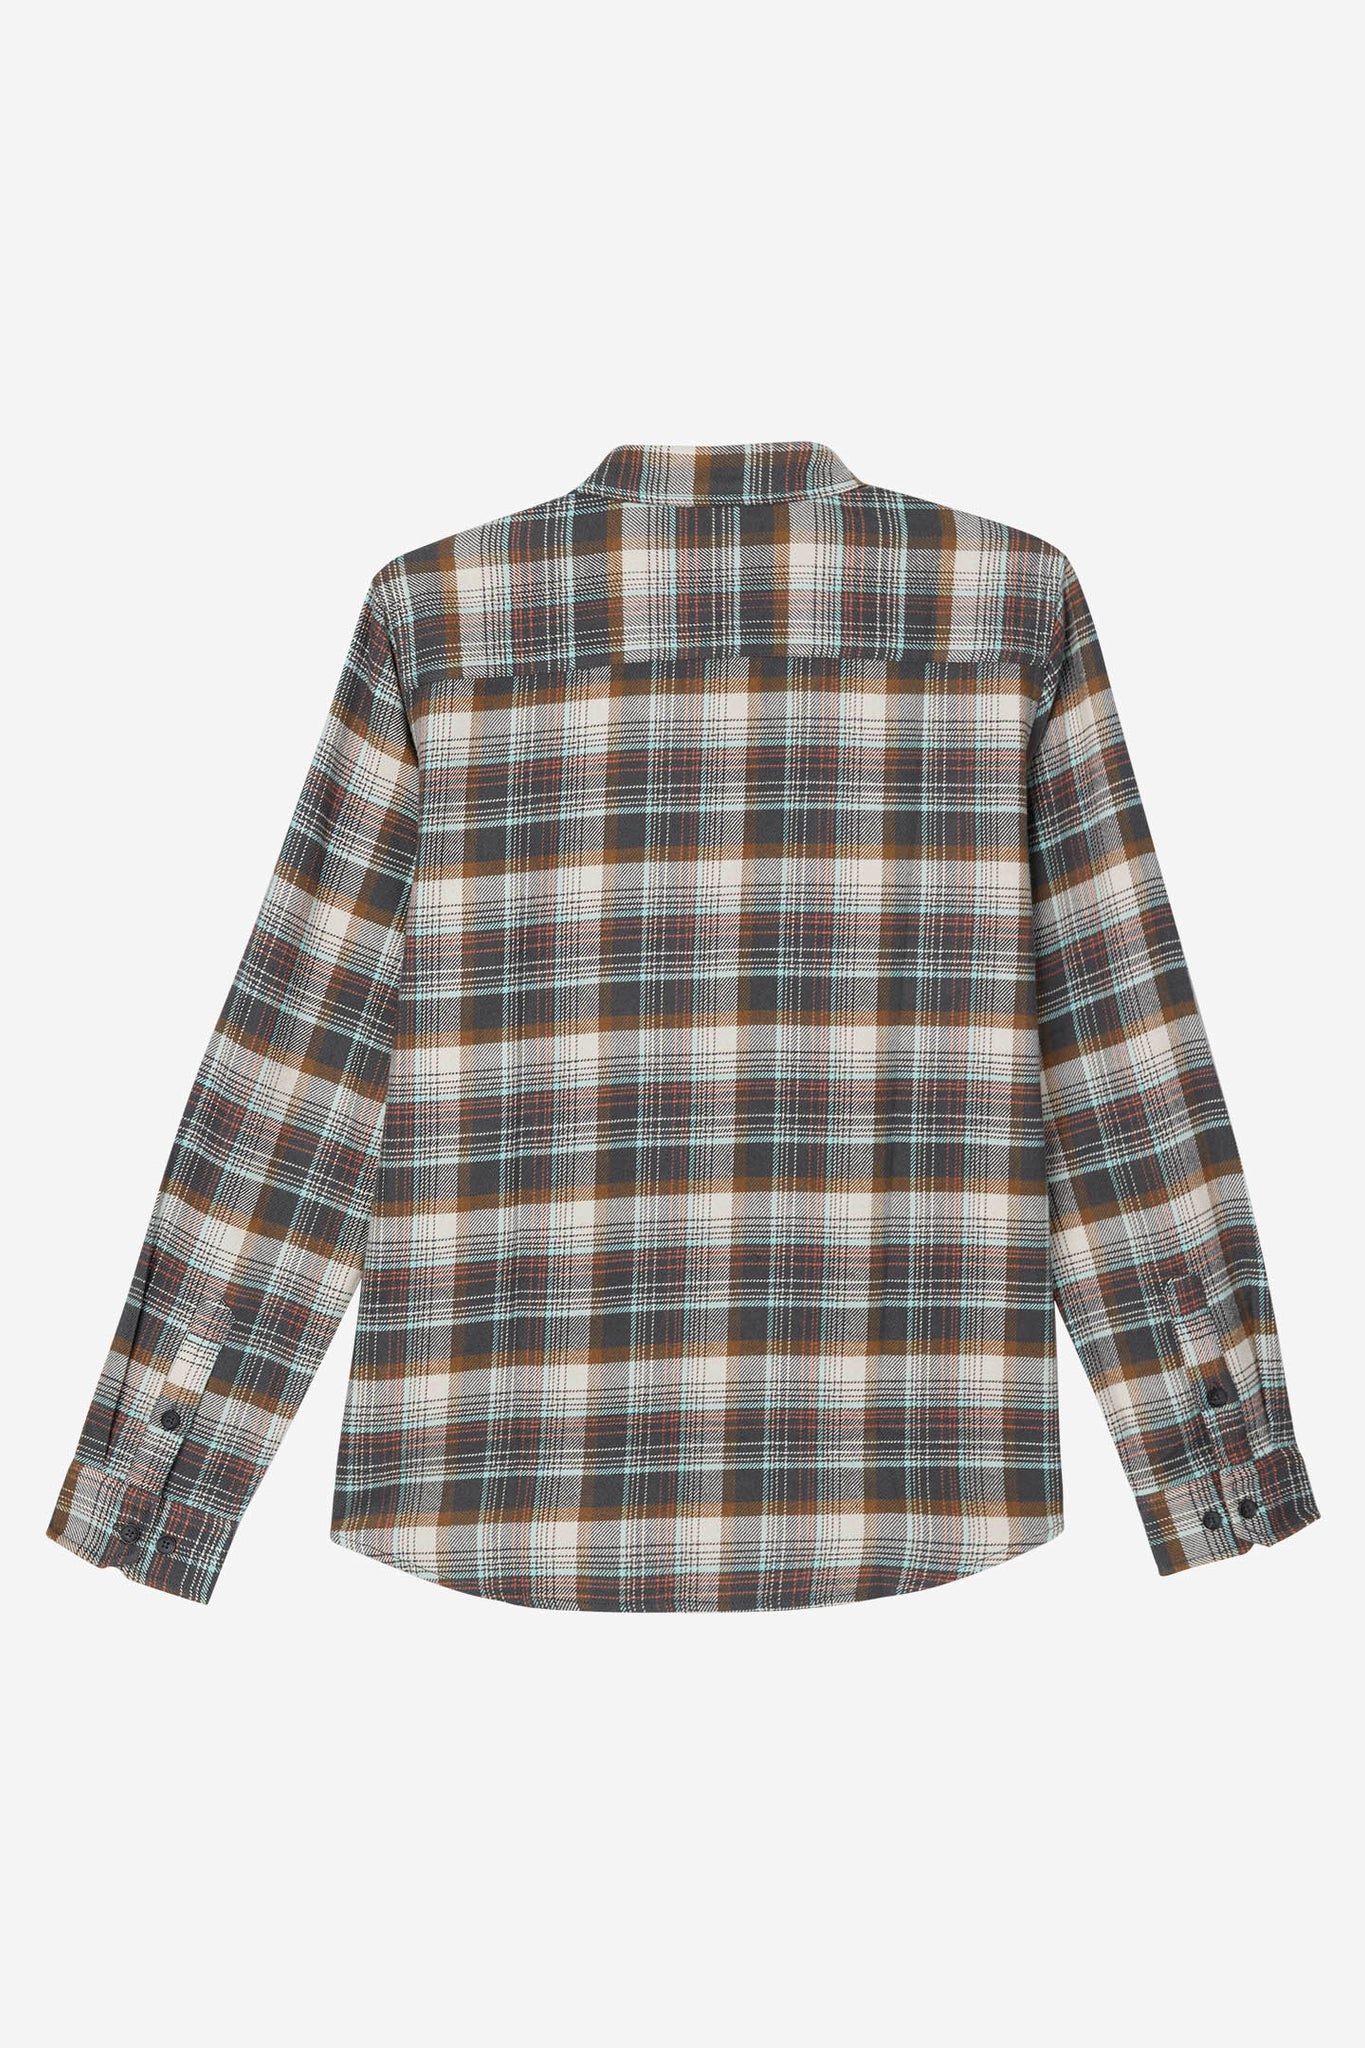 MEN'S FLANNEL CHECKED LONG SLEEVE SHIRT